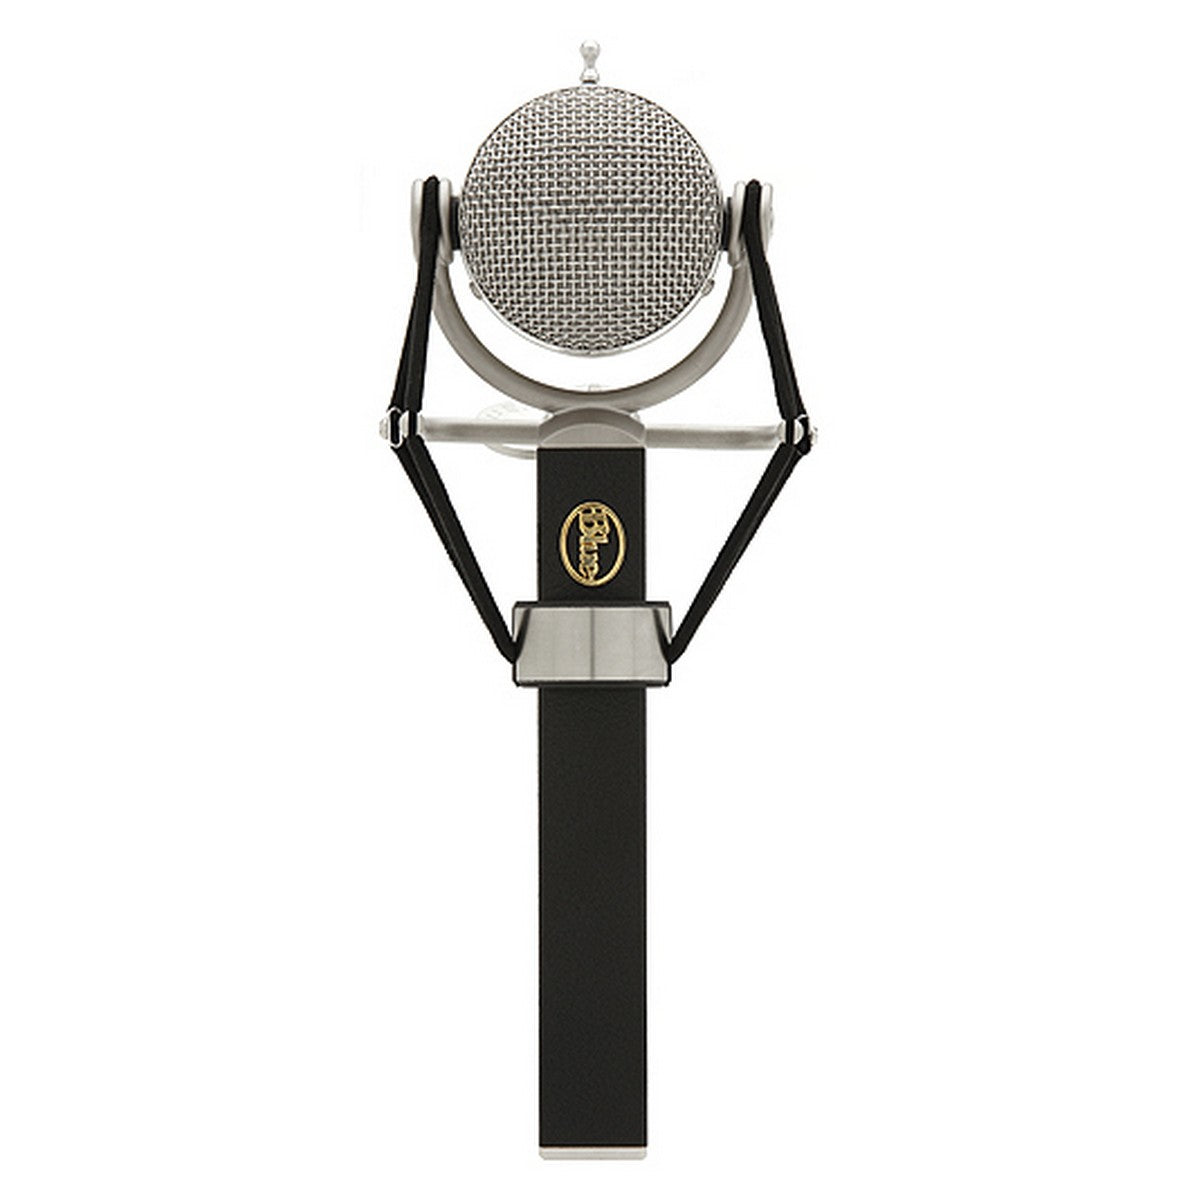 Blue Microphones Dragonfly Large Diaphragm Studio Condenser Microphone with Rotating Capsule